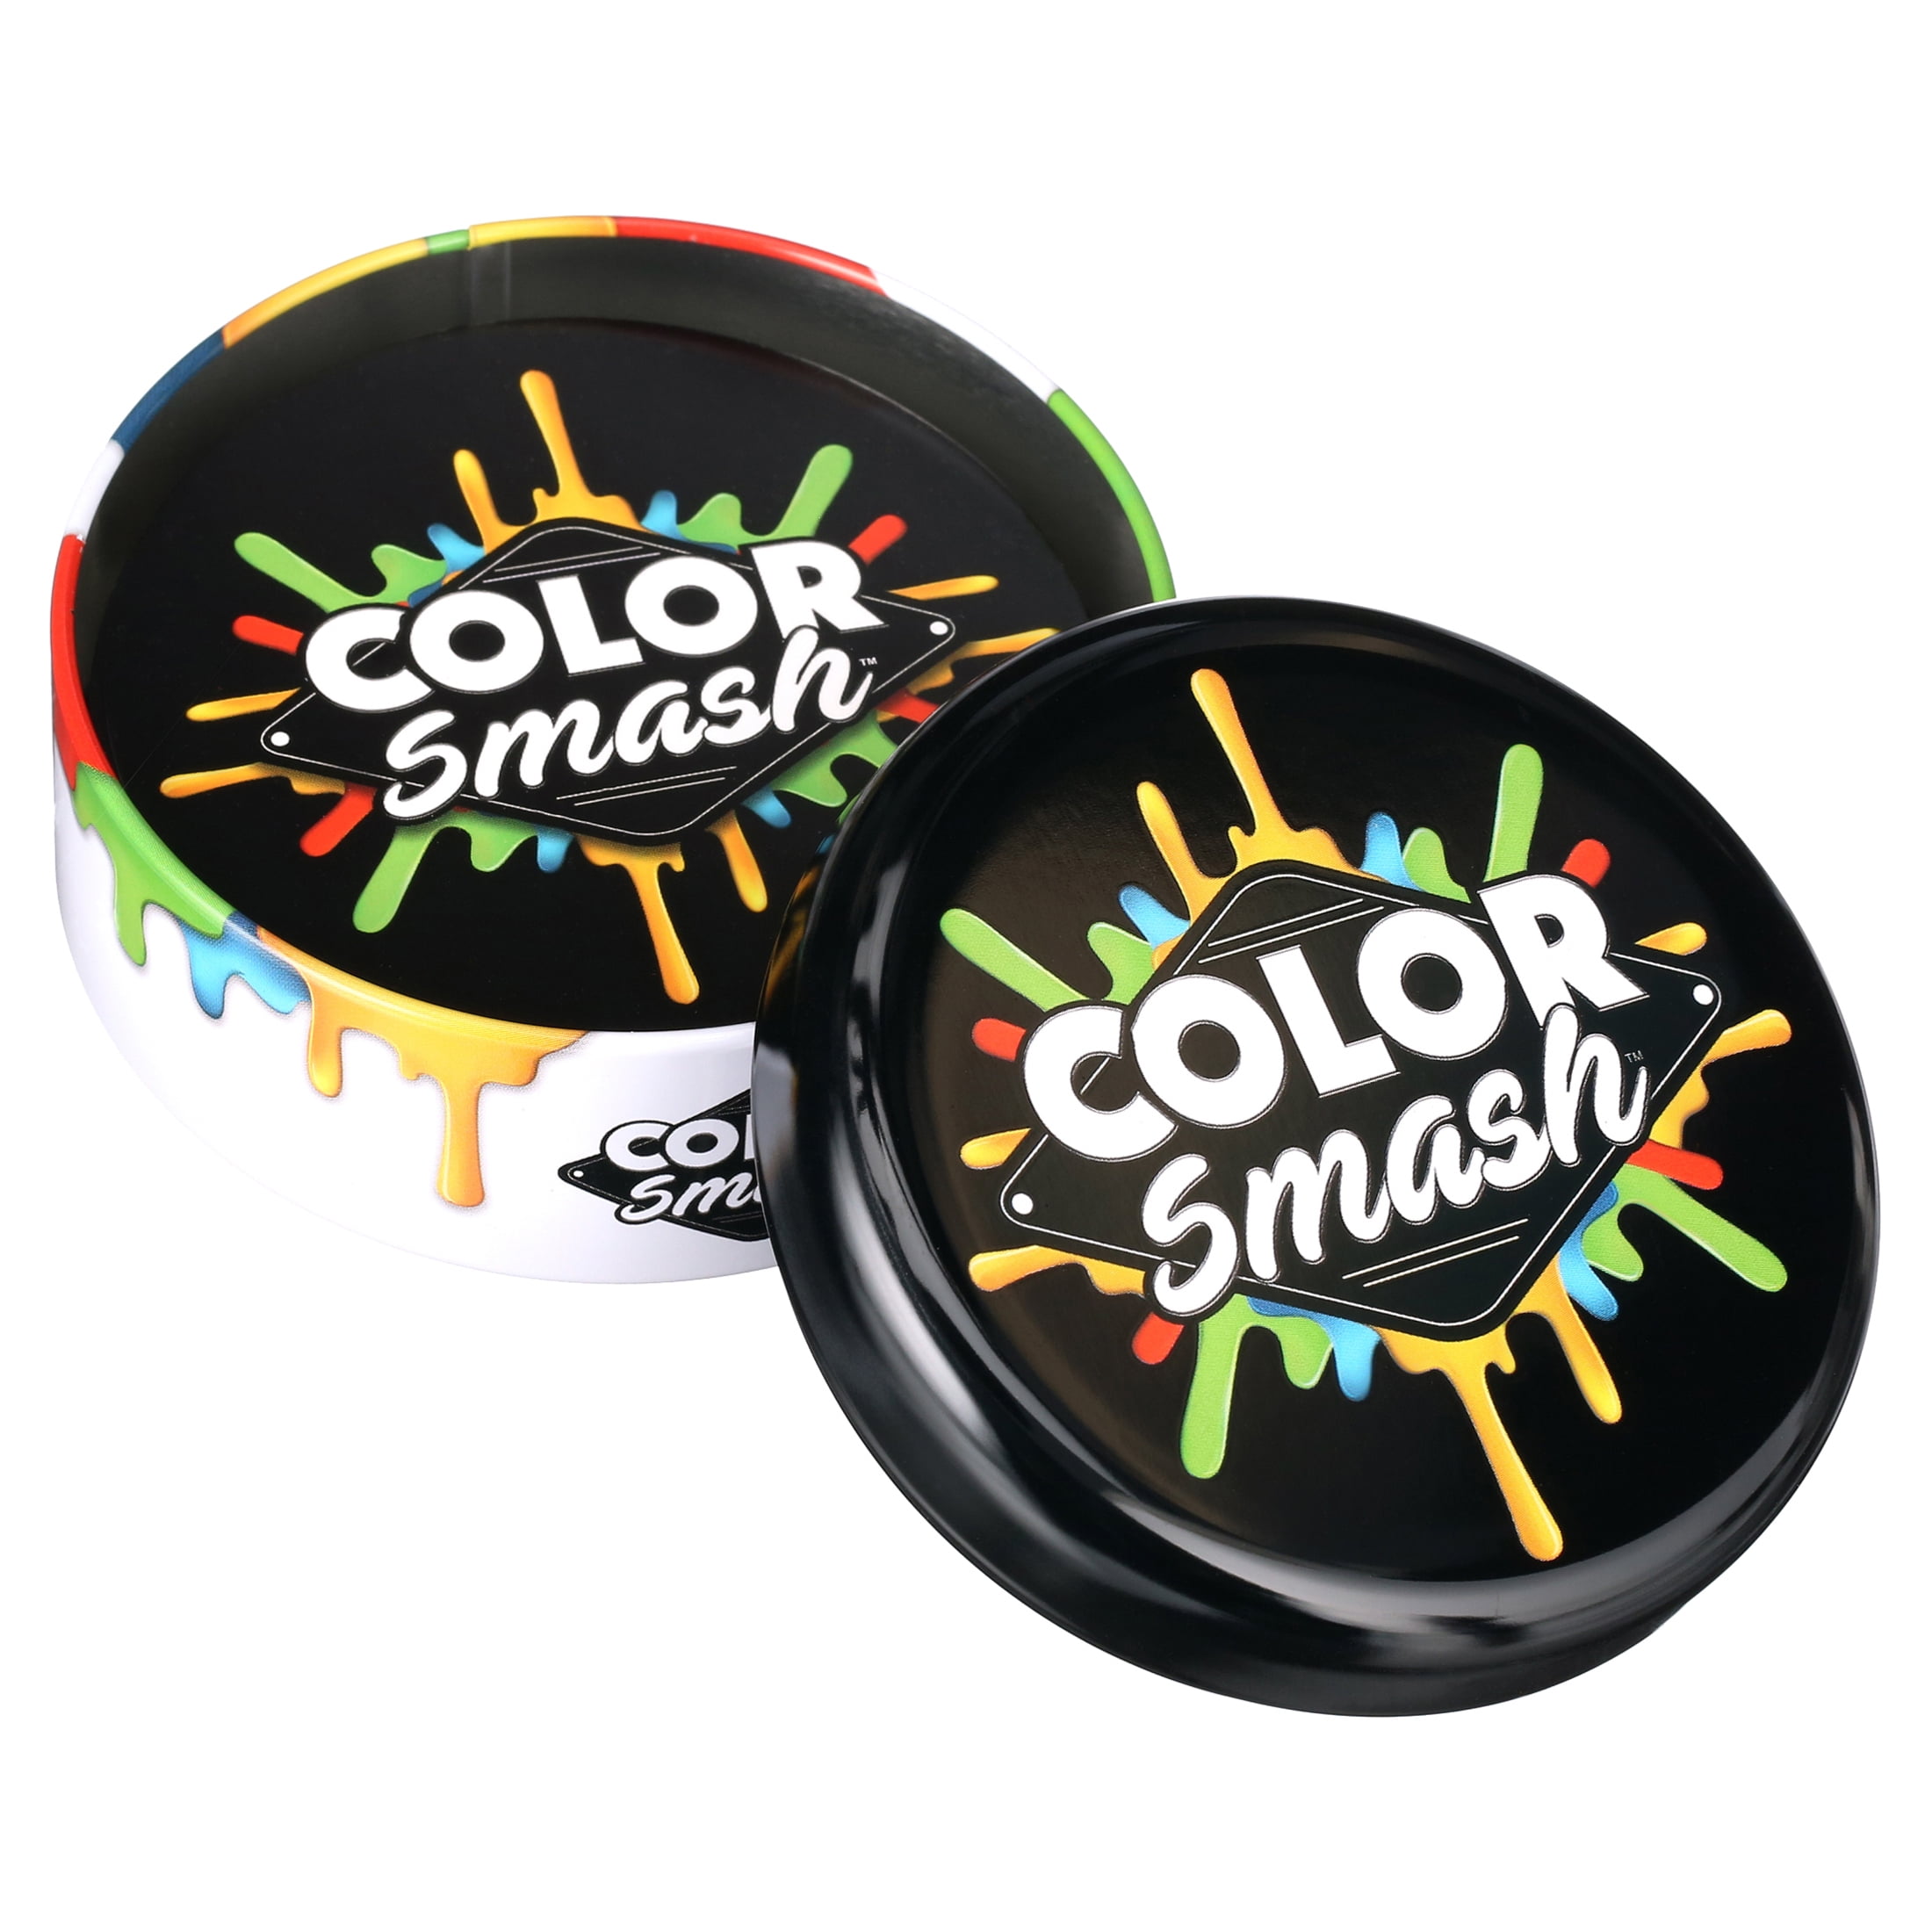 Color Smash is the fast moving game of colour coordination